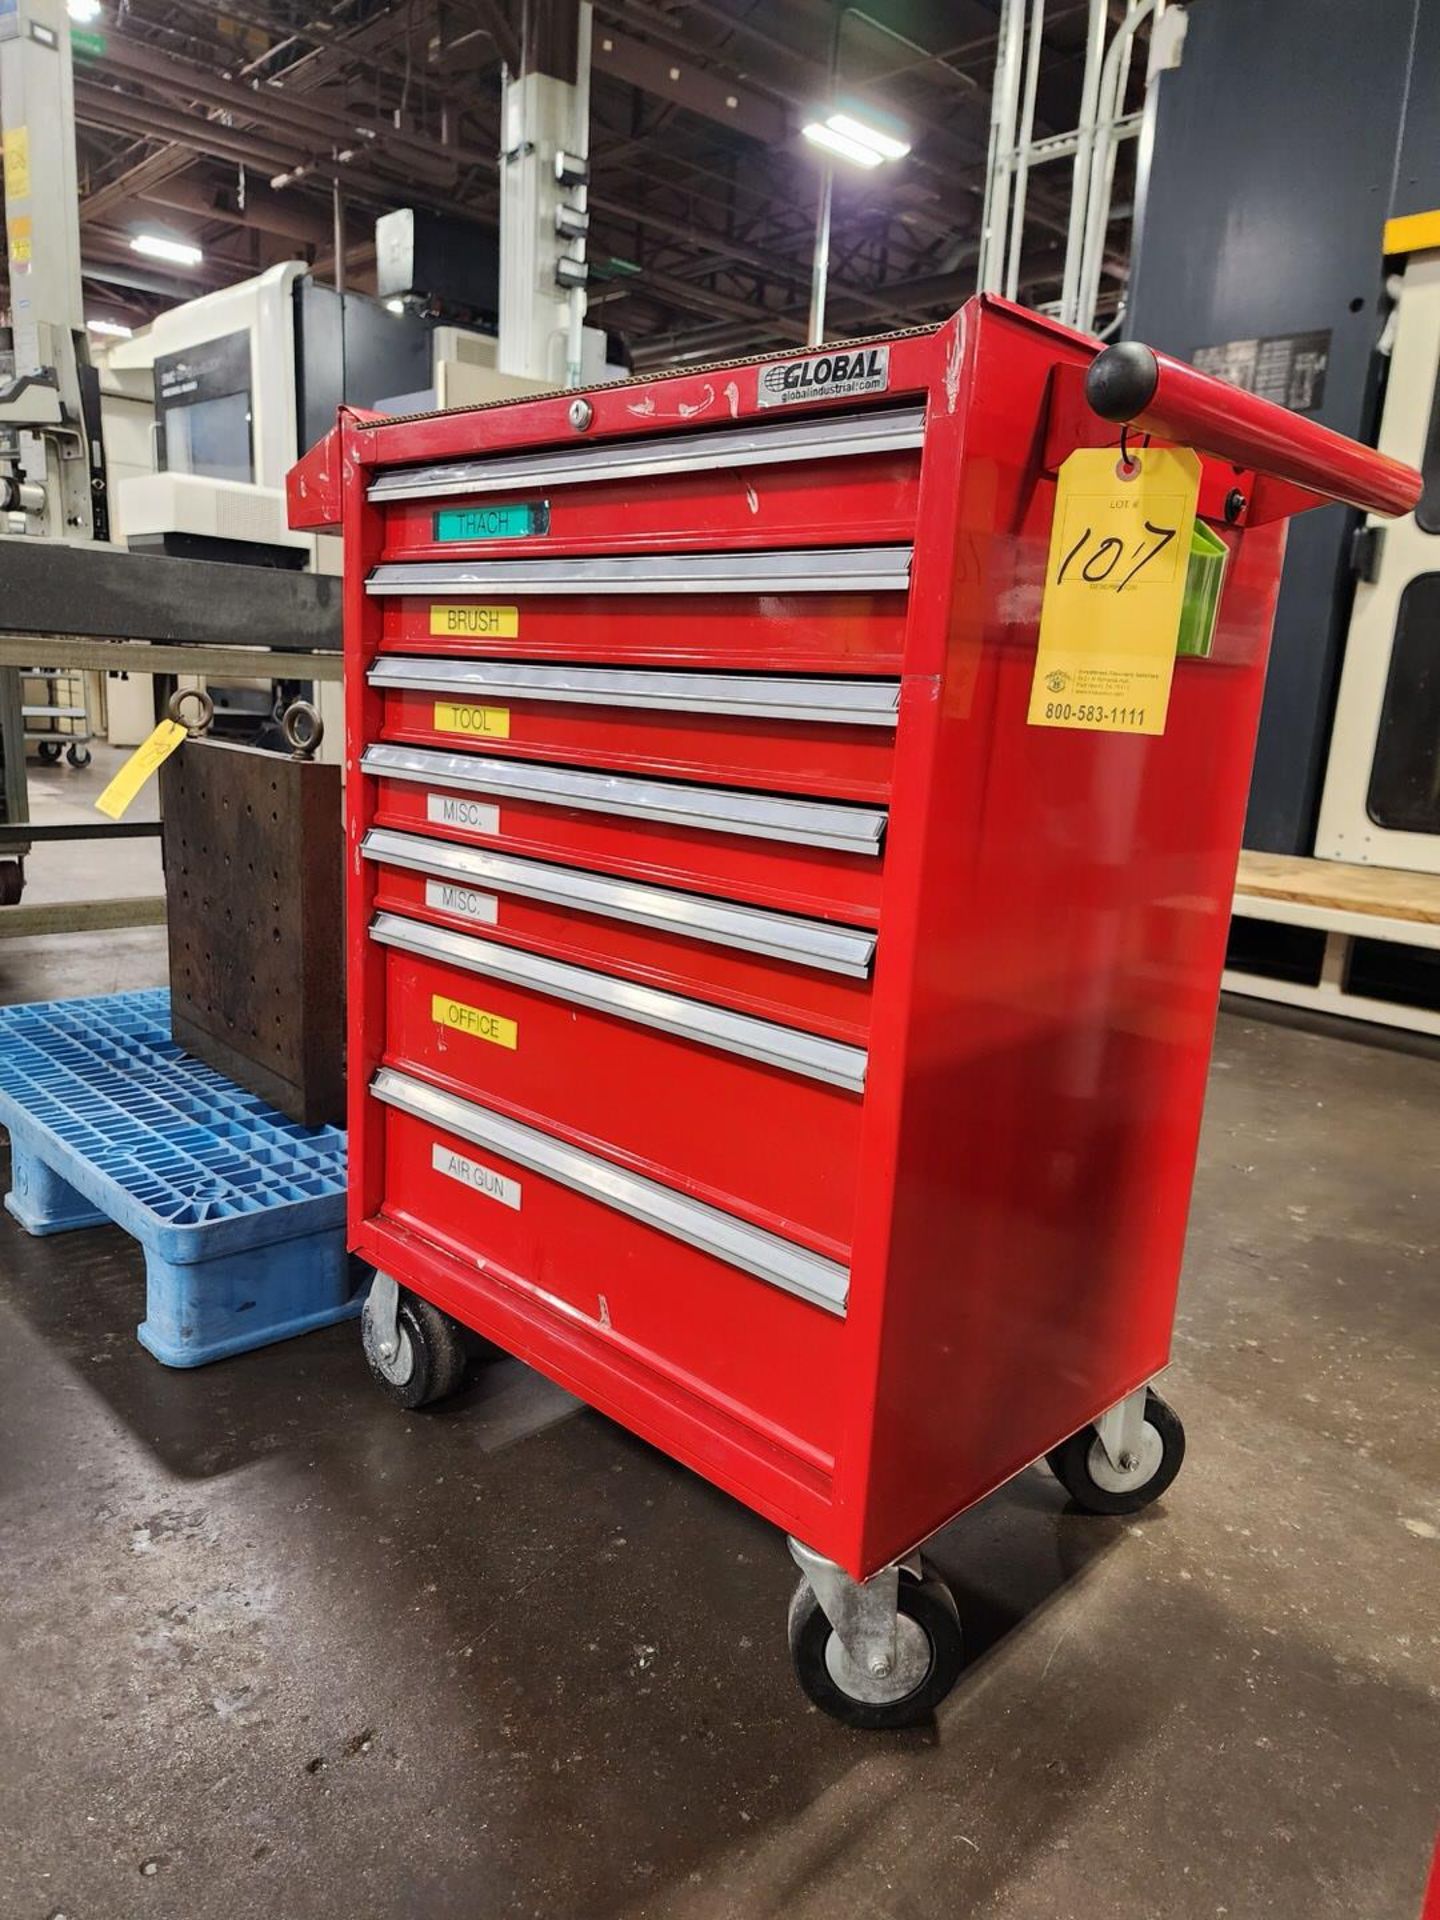 Global 7-Drawer Rolling Tool Box (Location: Machine Room) - Image 2 of 11